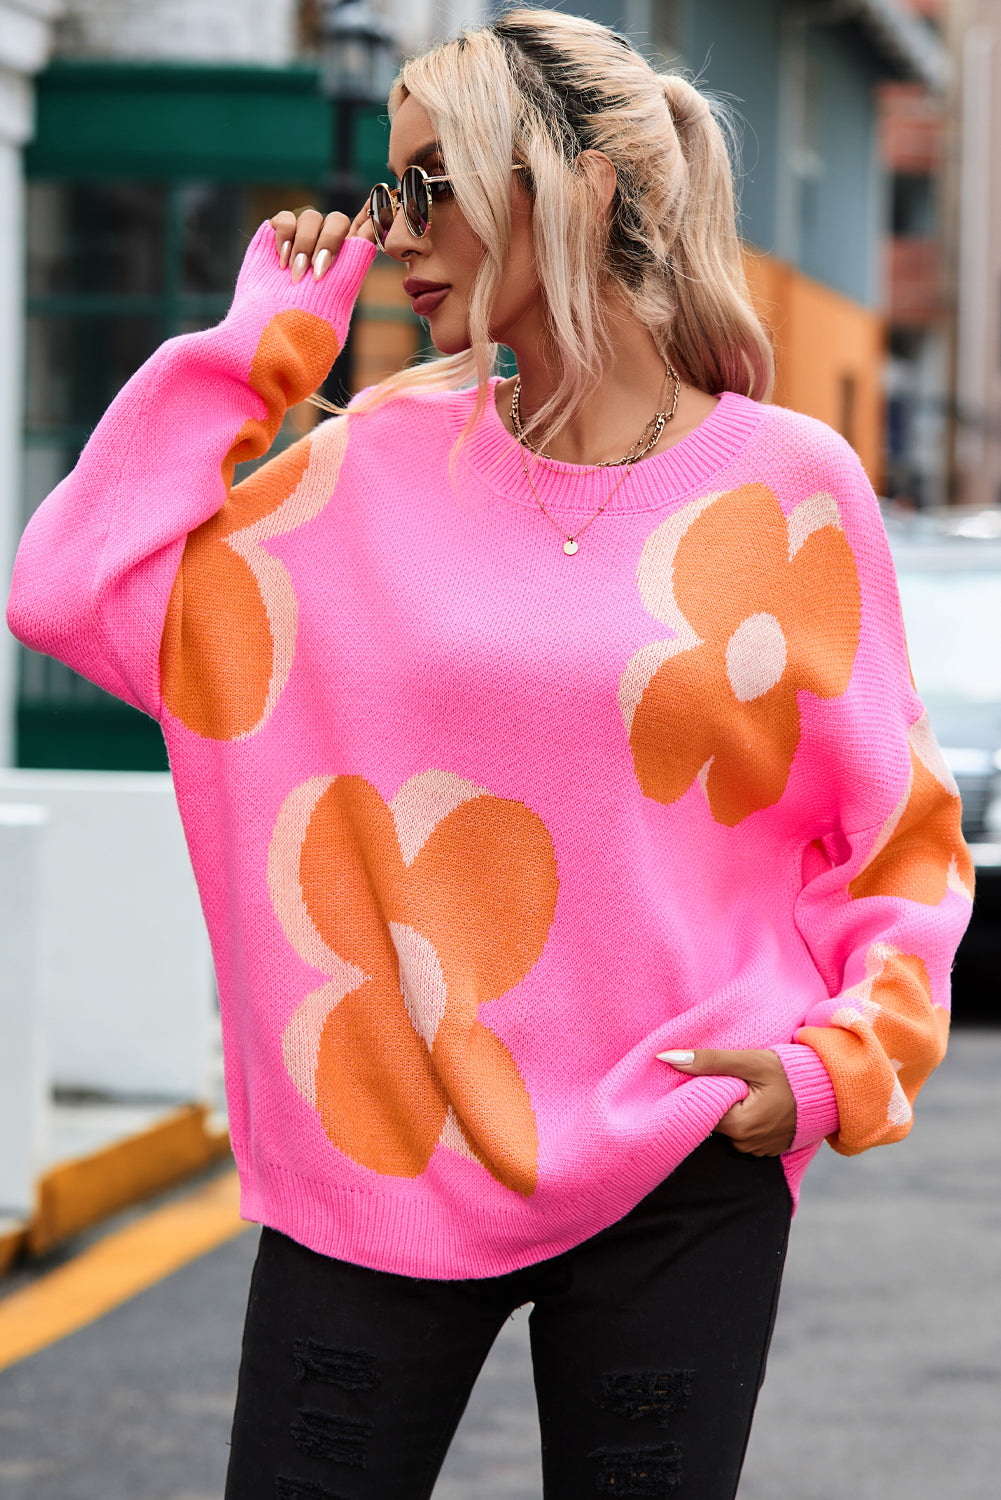 The Flower Power Sweater